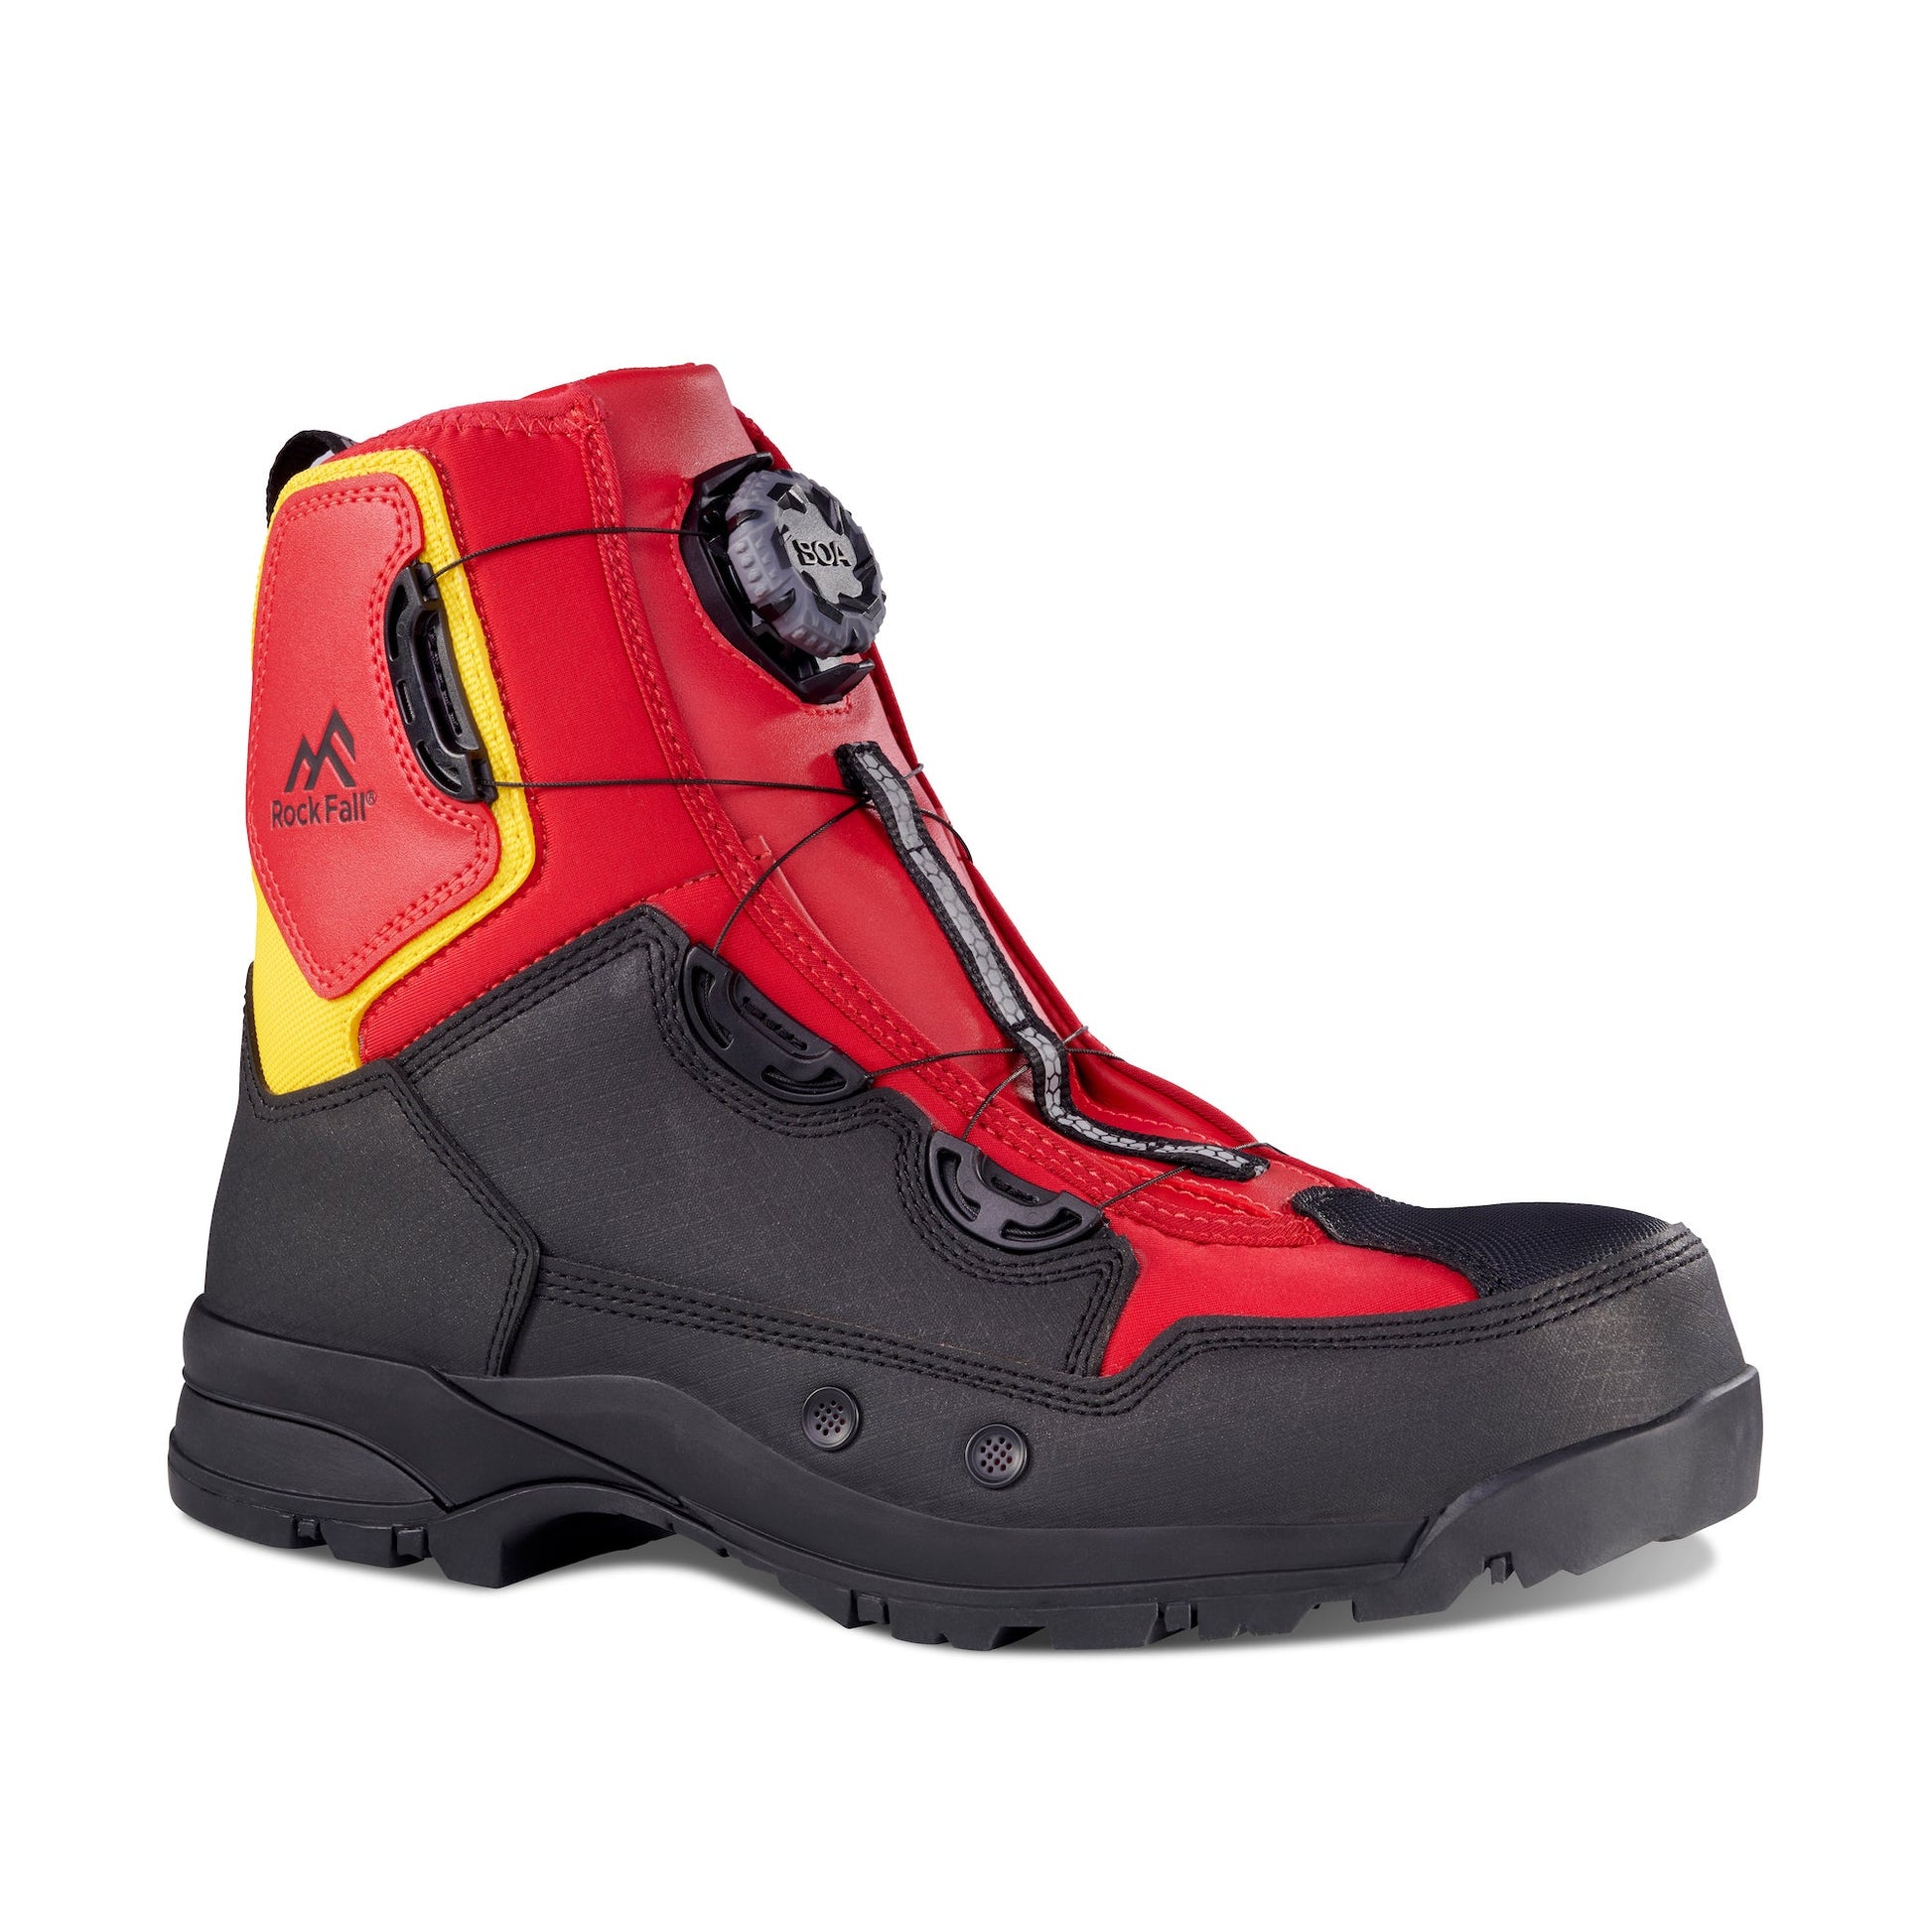 WRS Water Rescue Boot – Water Rescue Systems/RESCUE ZONE